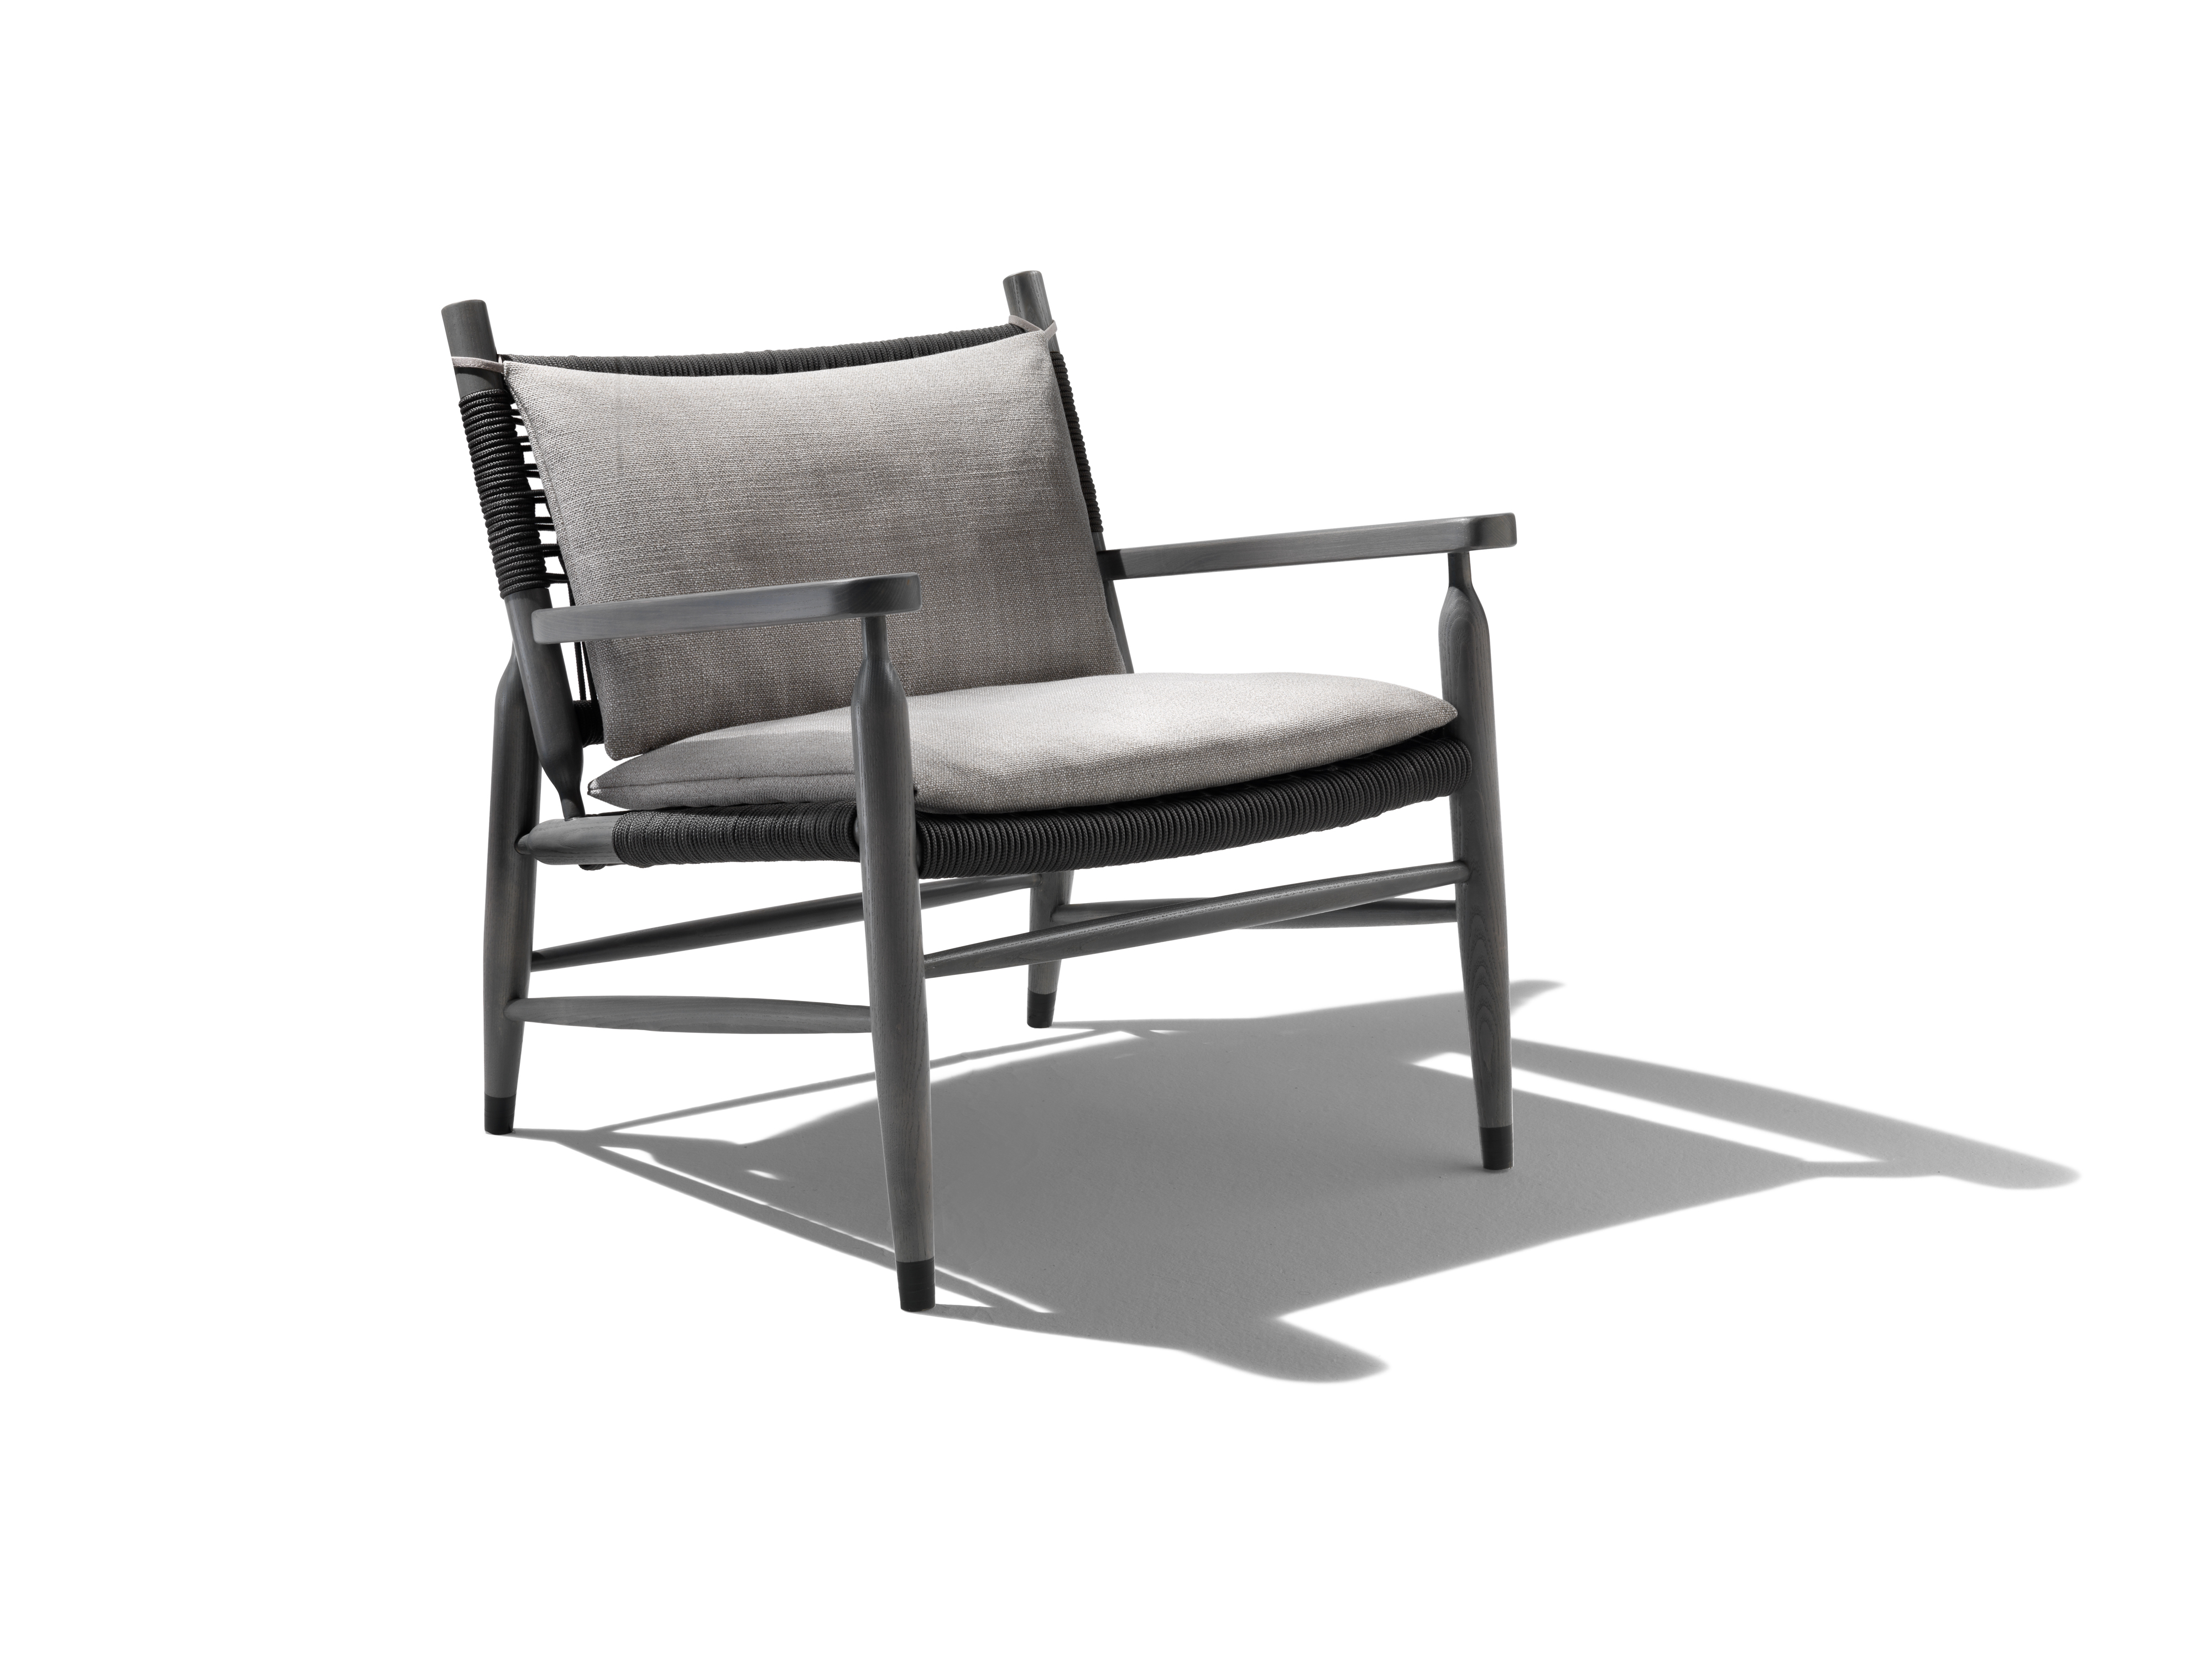 The Tessa Collection of Indoor and Outdoor Furniture by Flexform